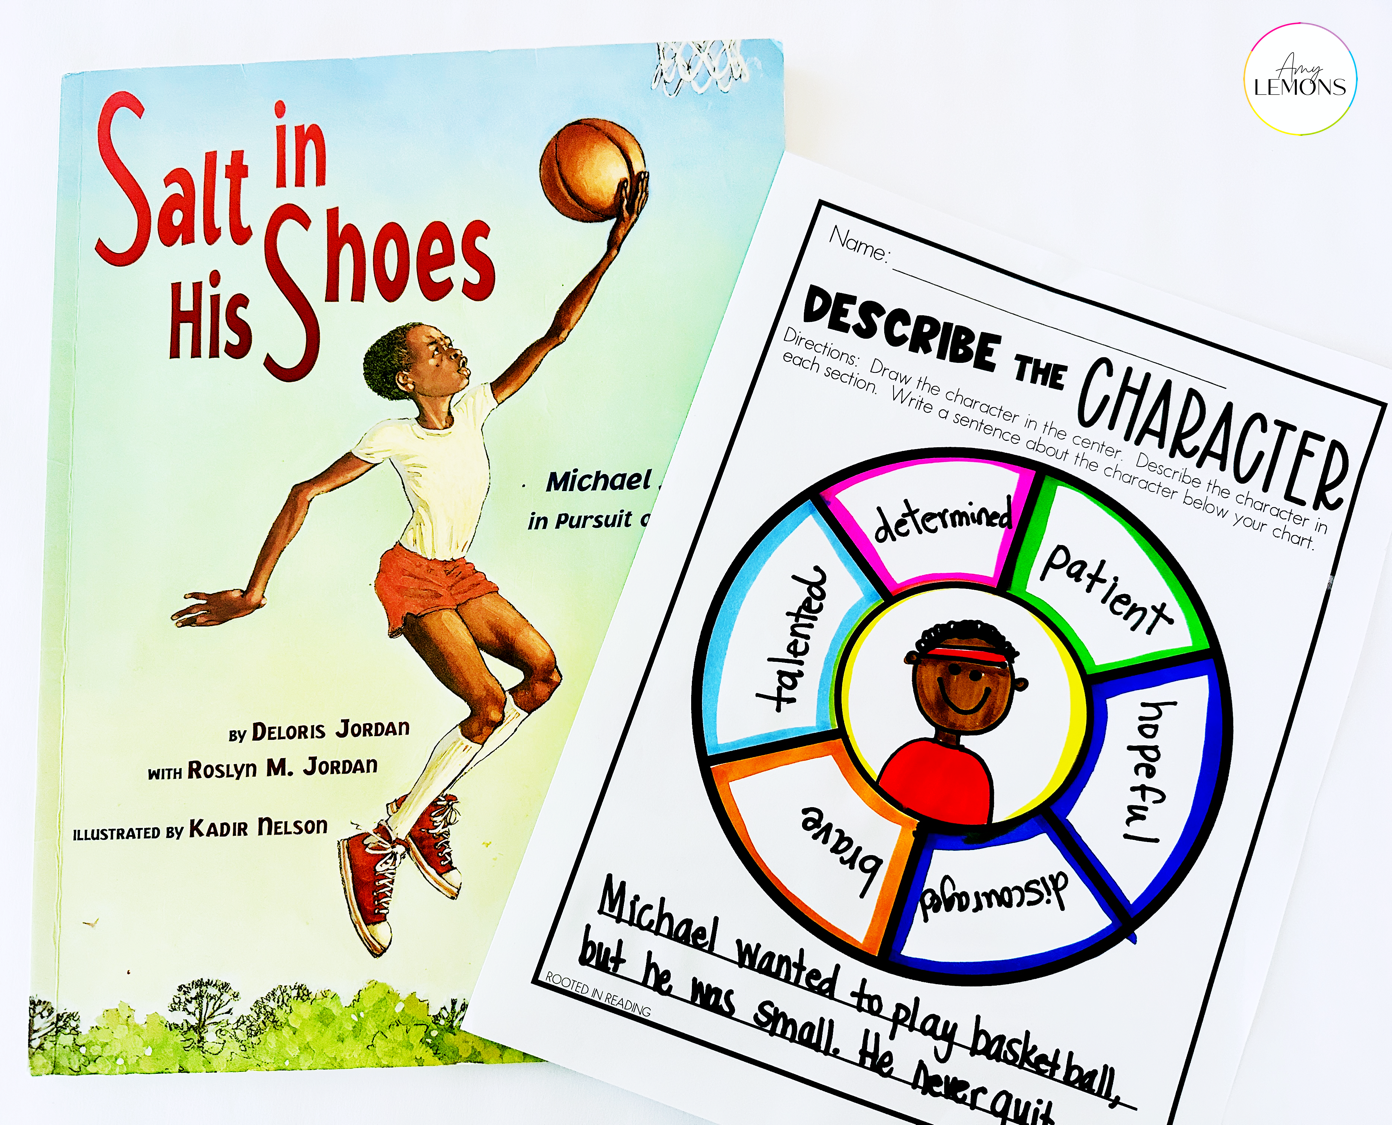 Salt in His shoes book paired with the Describe the Character reading response graphic organizer